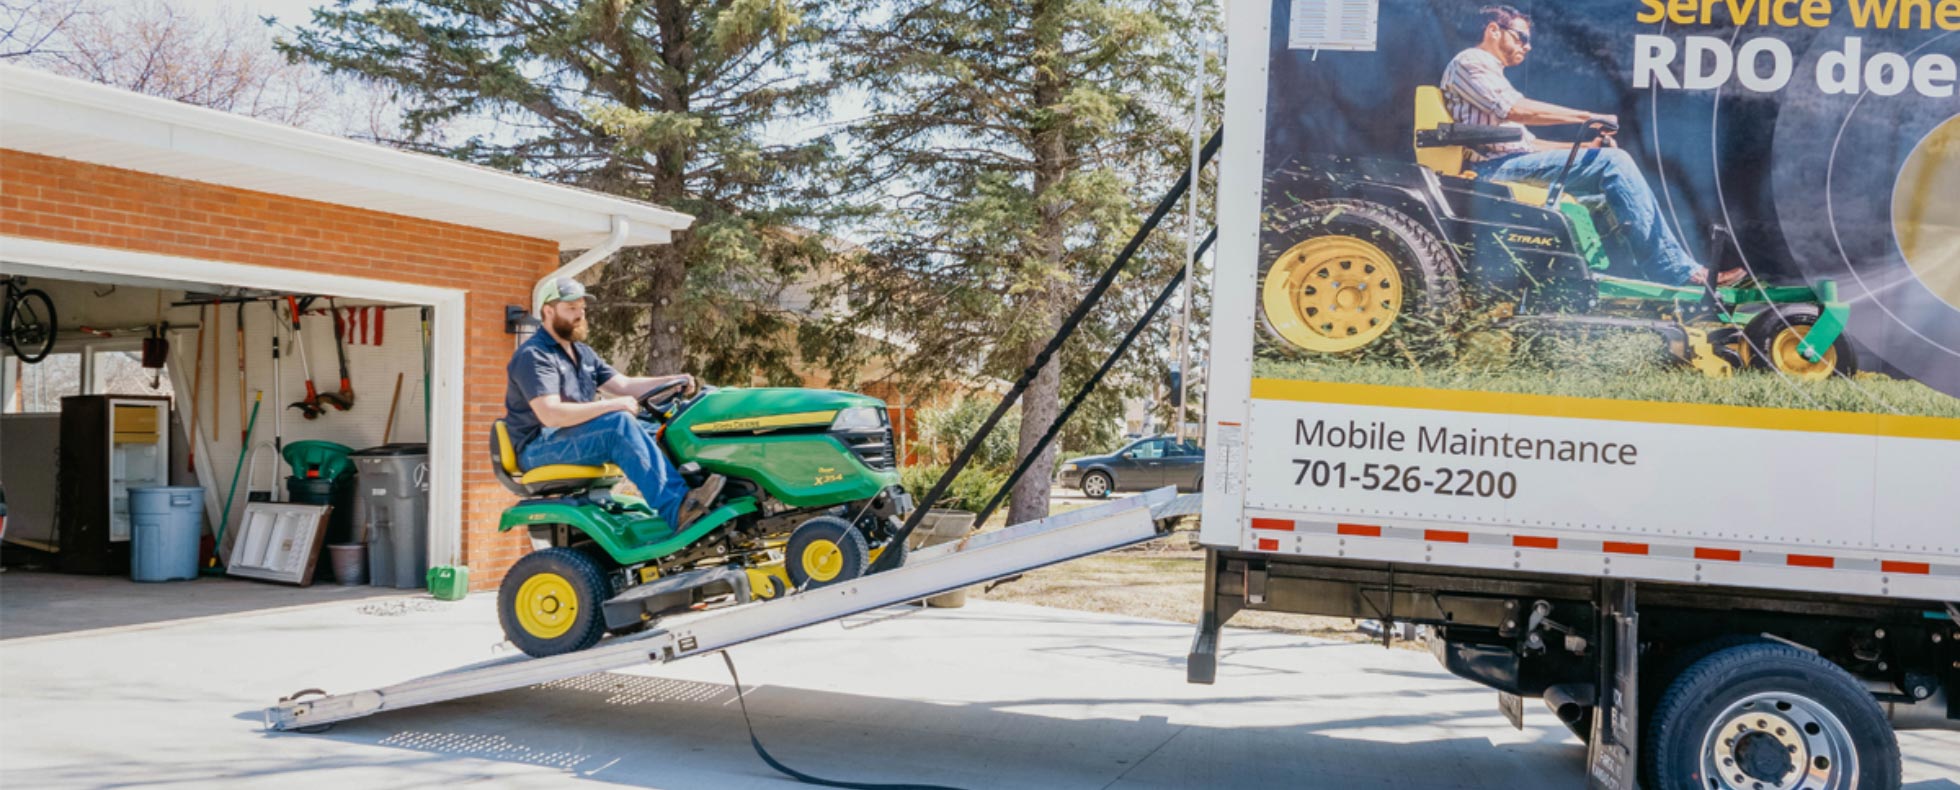 9 Exclusive Benefits of Mobile Maintenance for Mowers, Tractors, and Outdoor Equipment